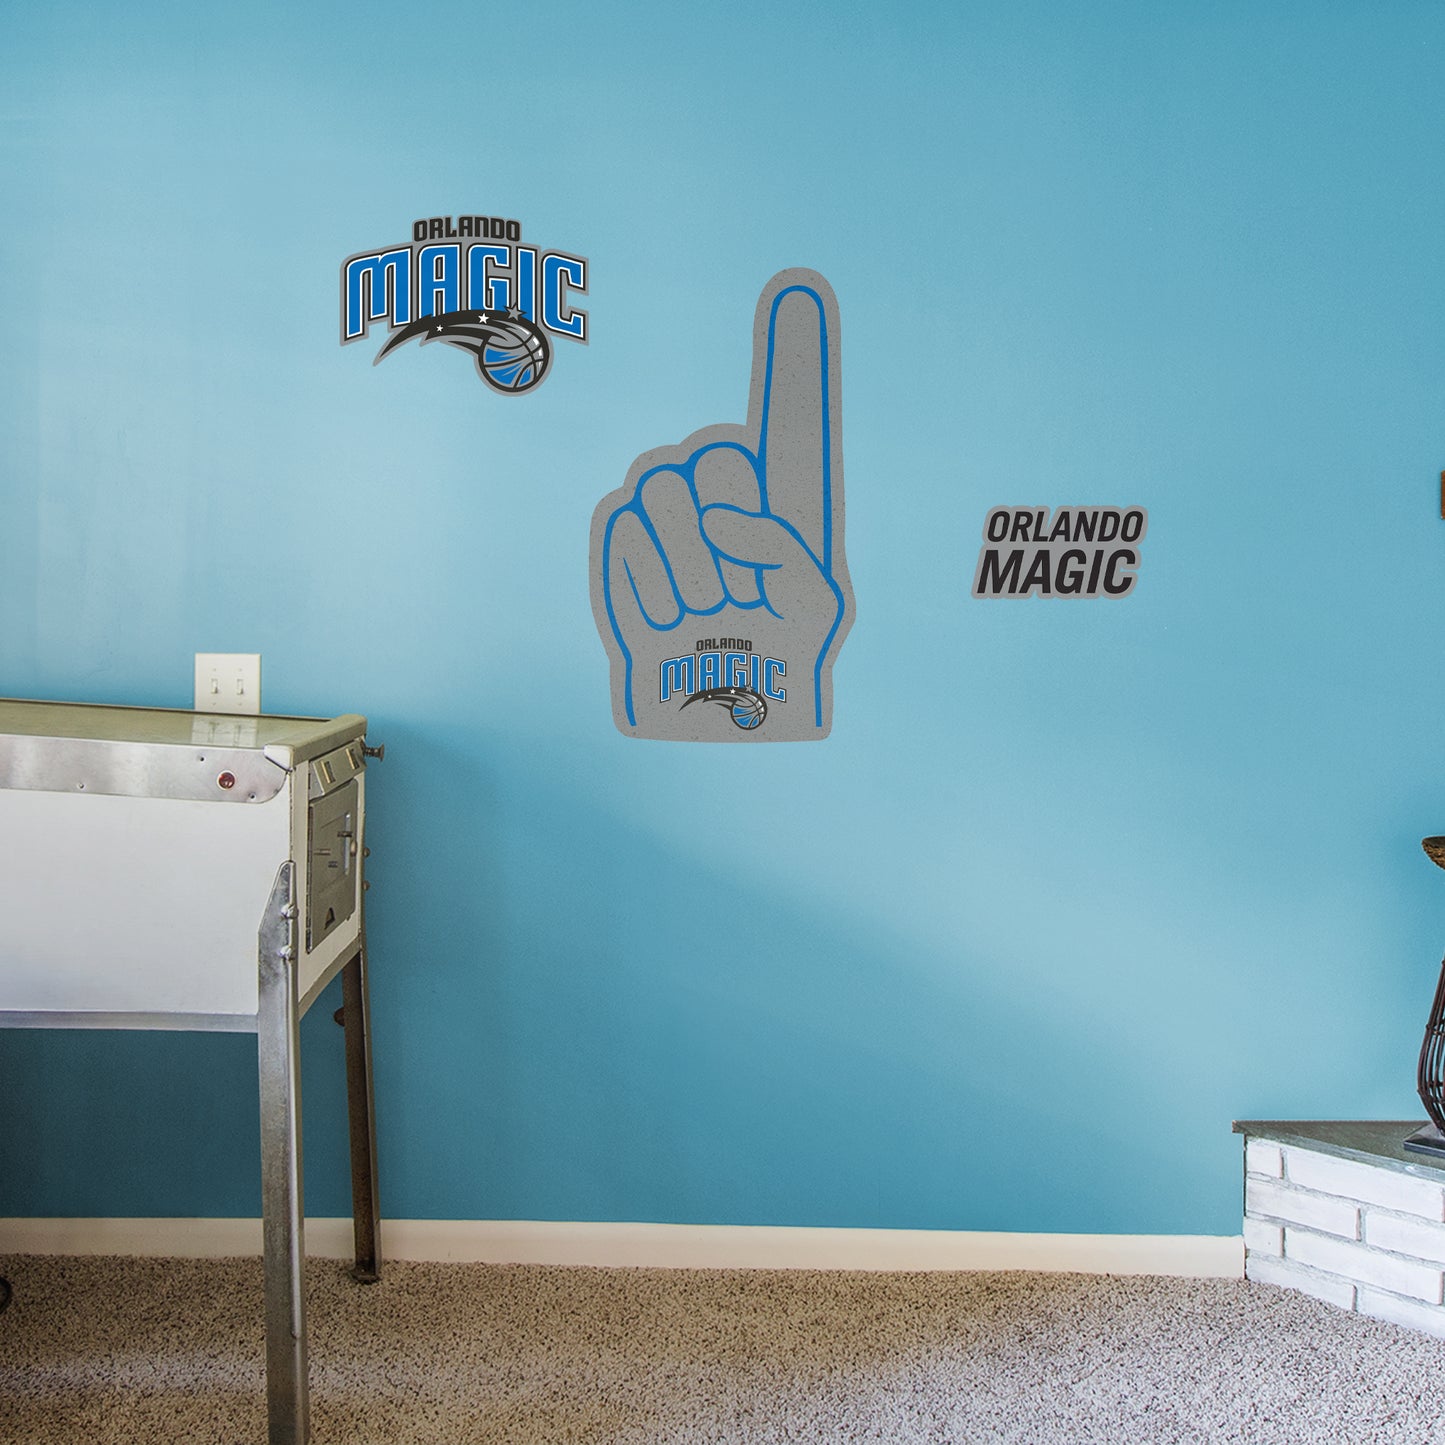 Orlando Magic: Foam Finger - Officially Licensed NBA Removable Adhesive Decal